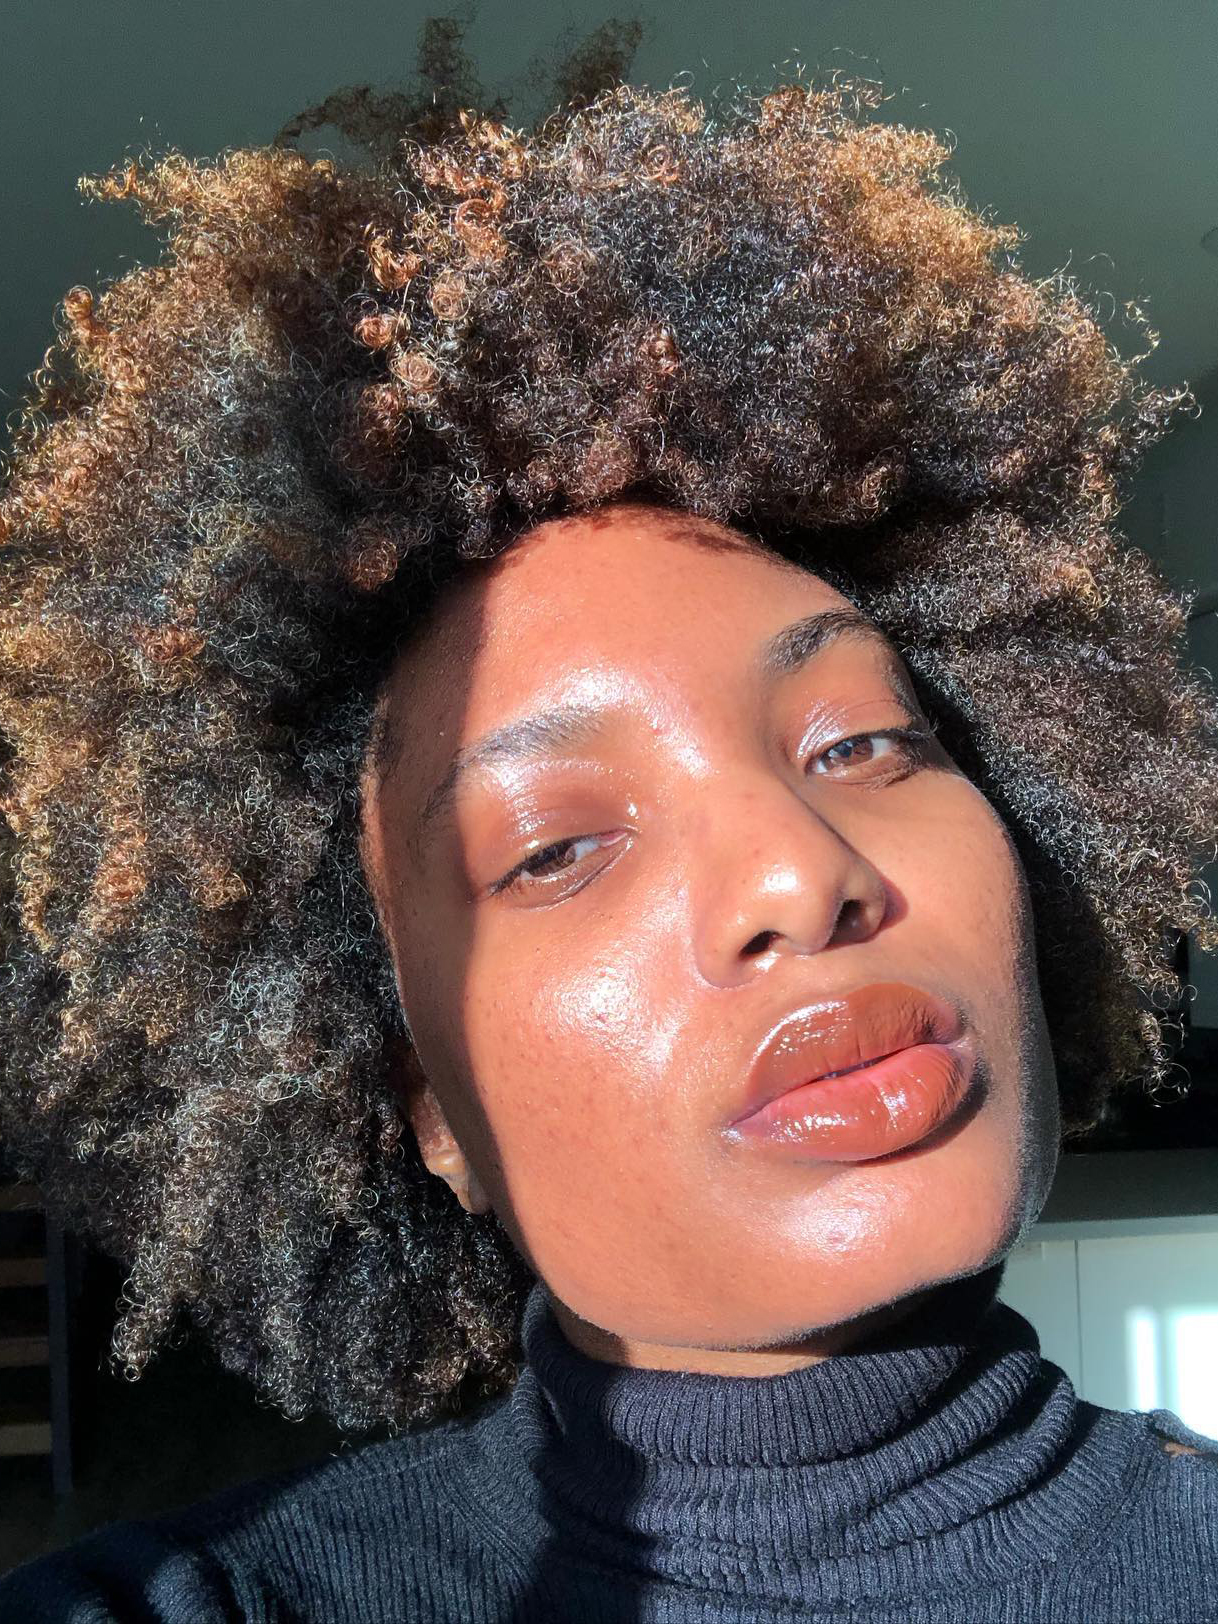 20 Products That Helped My Hyperpigmentation